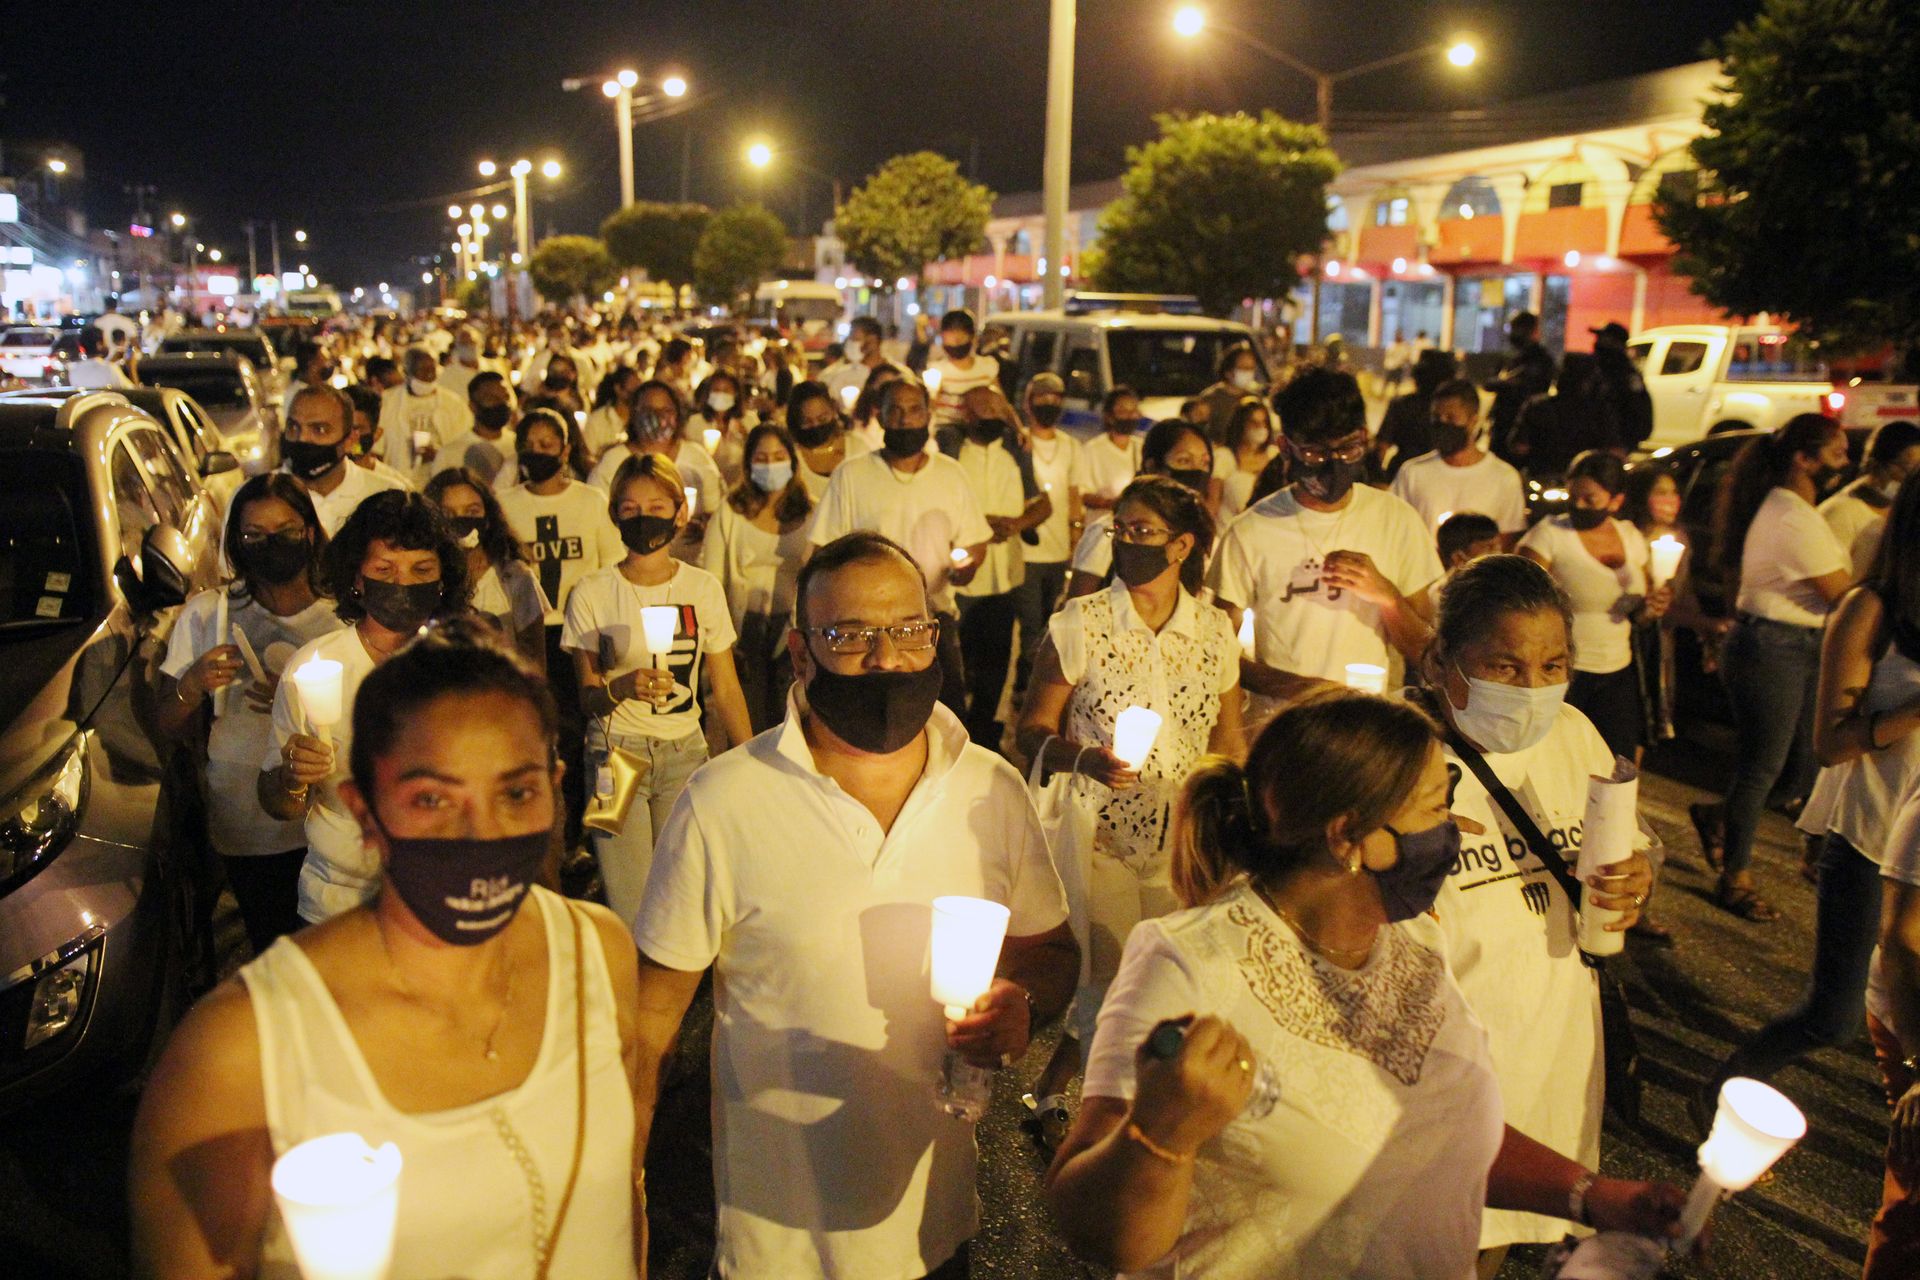 CoP: Seek approvals from the TTPS before holding large vigils